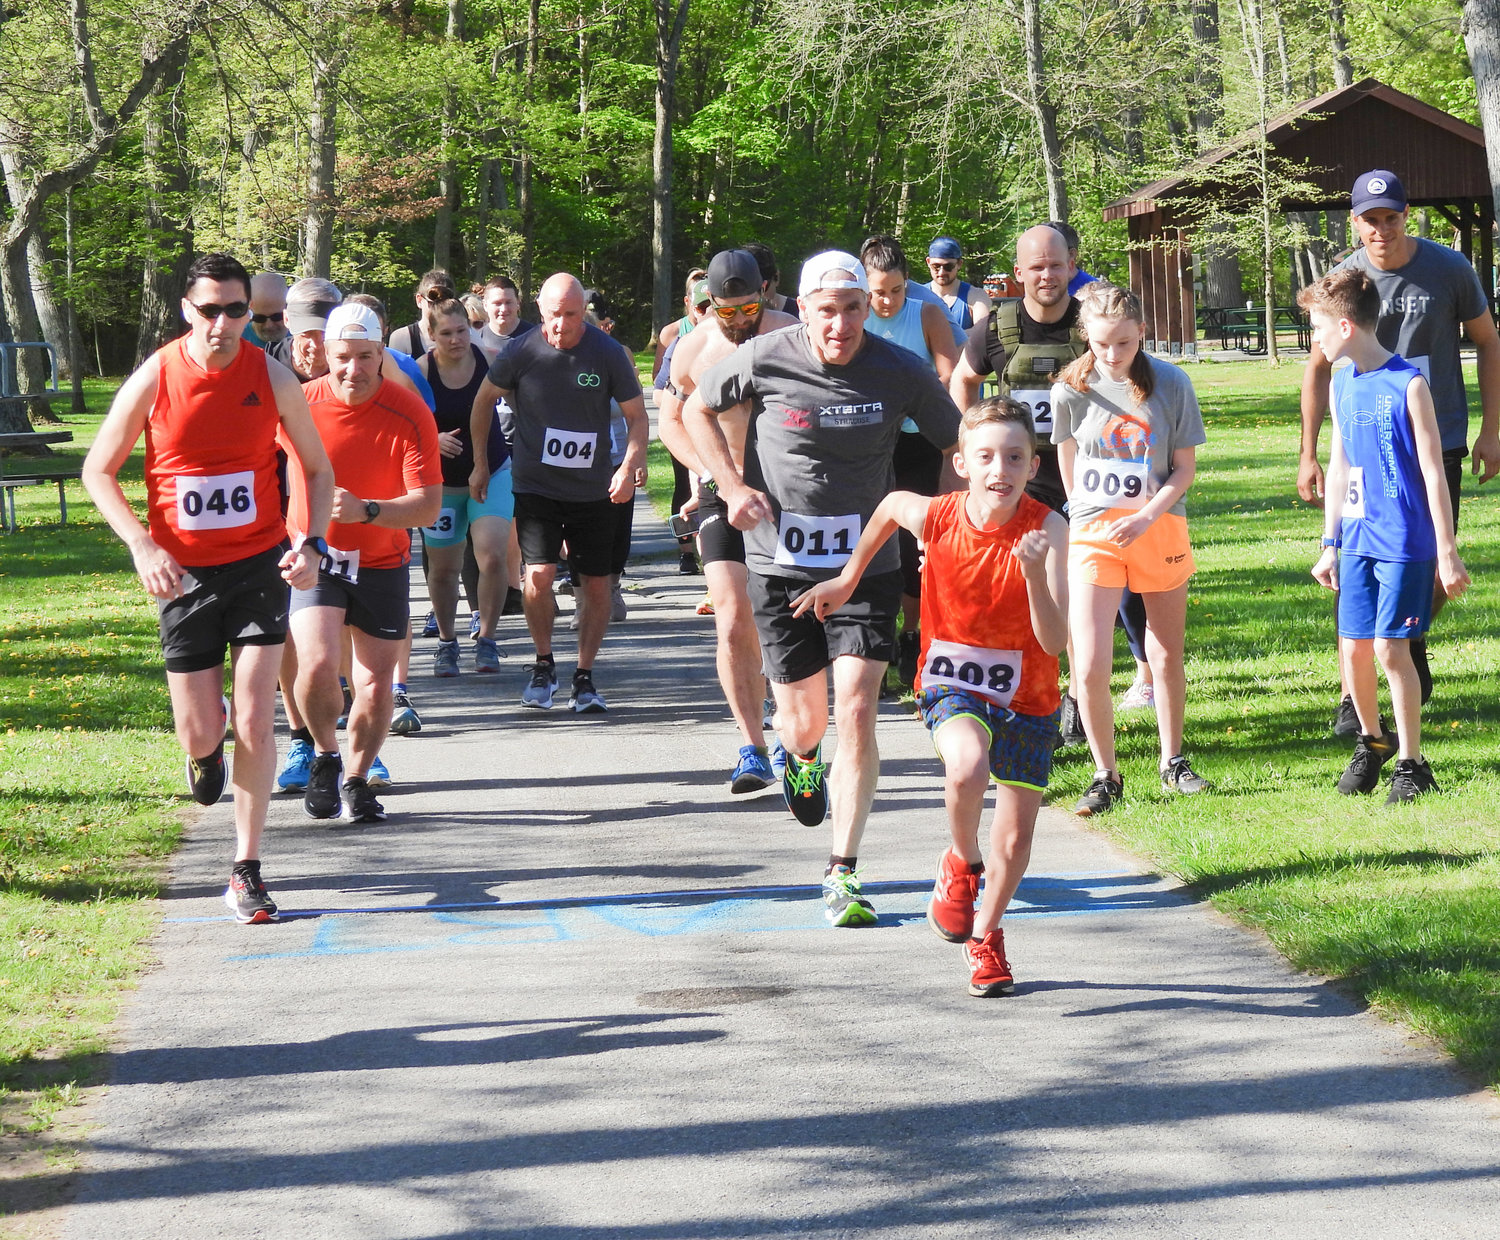 FRONT OF THE PACK — 10-year-old Liam Flint, a fourth-grader at North Broad Elementary takes off at a dead sprint for the Husky Hustle 5k Fun Run and Walk at Verona Beach State Park. The Husky Hustle raises money for the North Broad Elementary PTO.